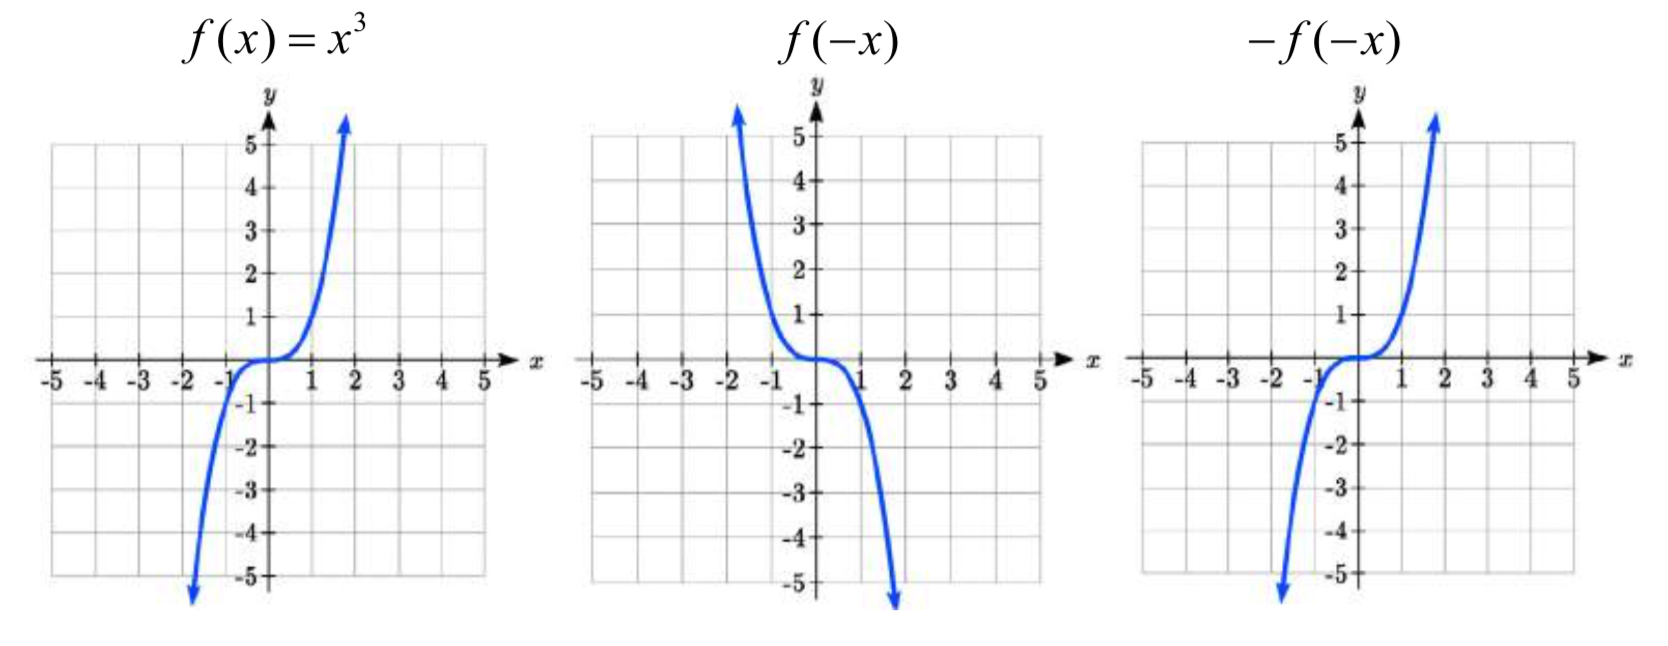 A vertical and horizontal flip of a standard cubic graph, with the result looking like a standard cubic graph A standard cubic graph, increasing concave down to the origin, then increasing concave up A horizontal flip of a standard cubic graph, decreasing concave up then decreasing concave down